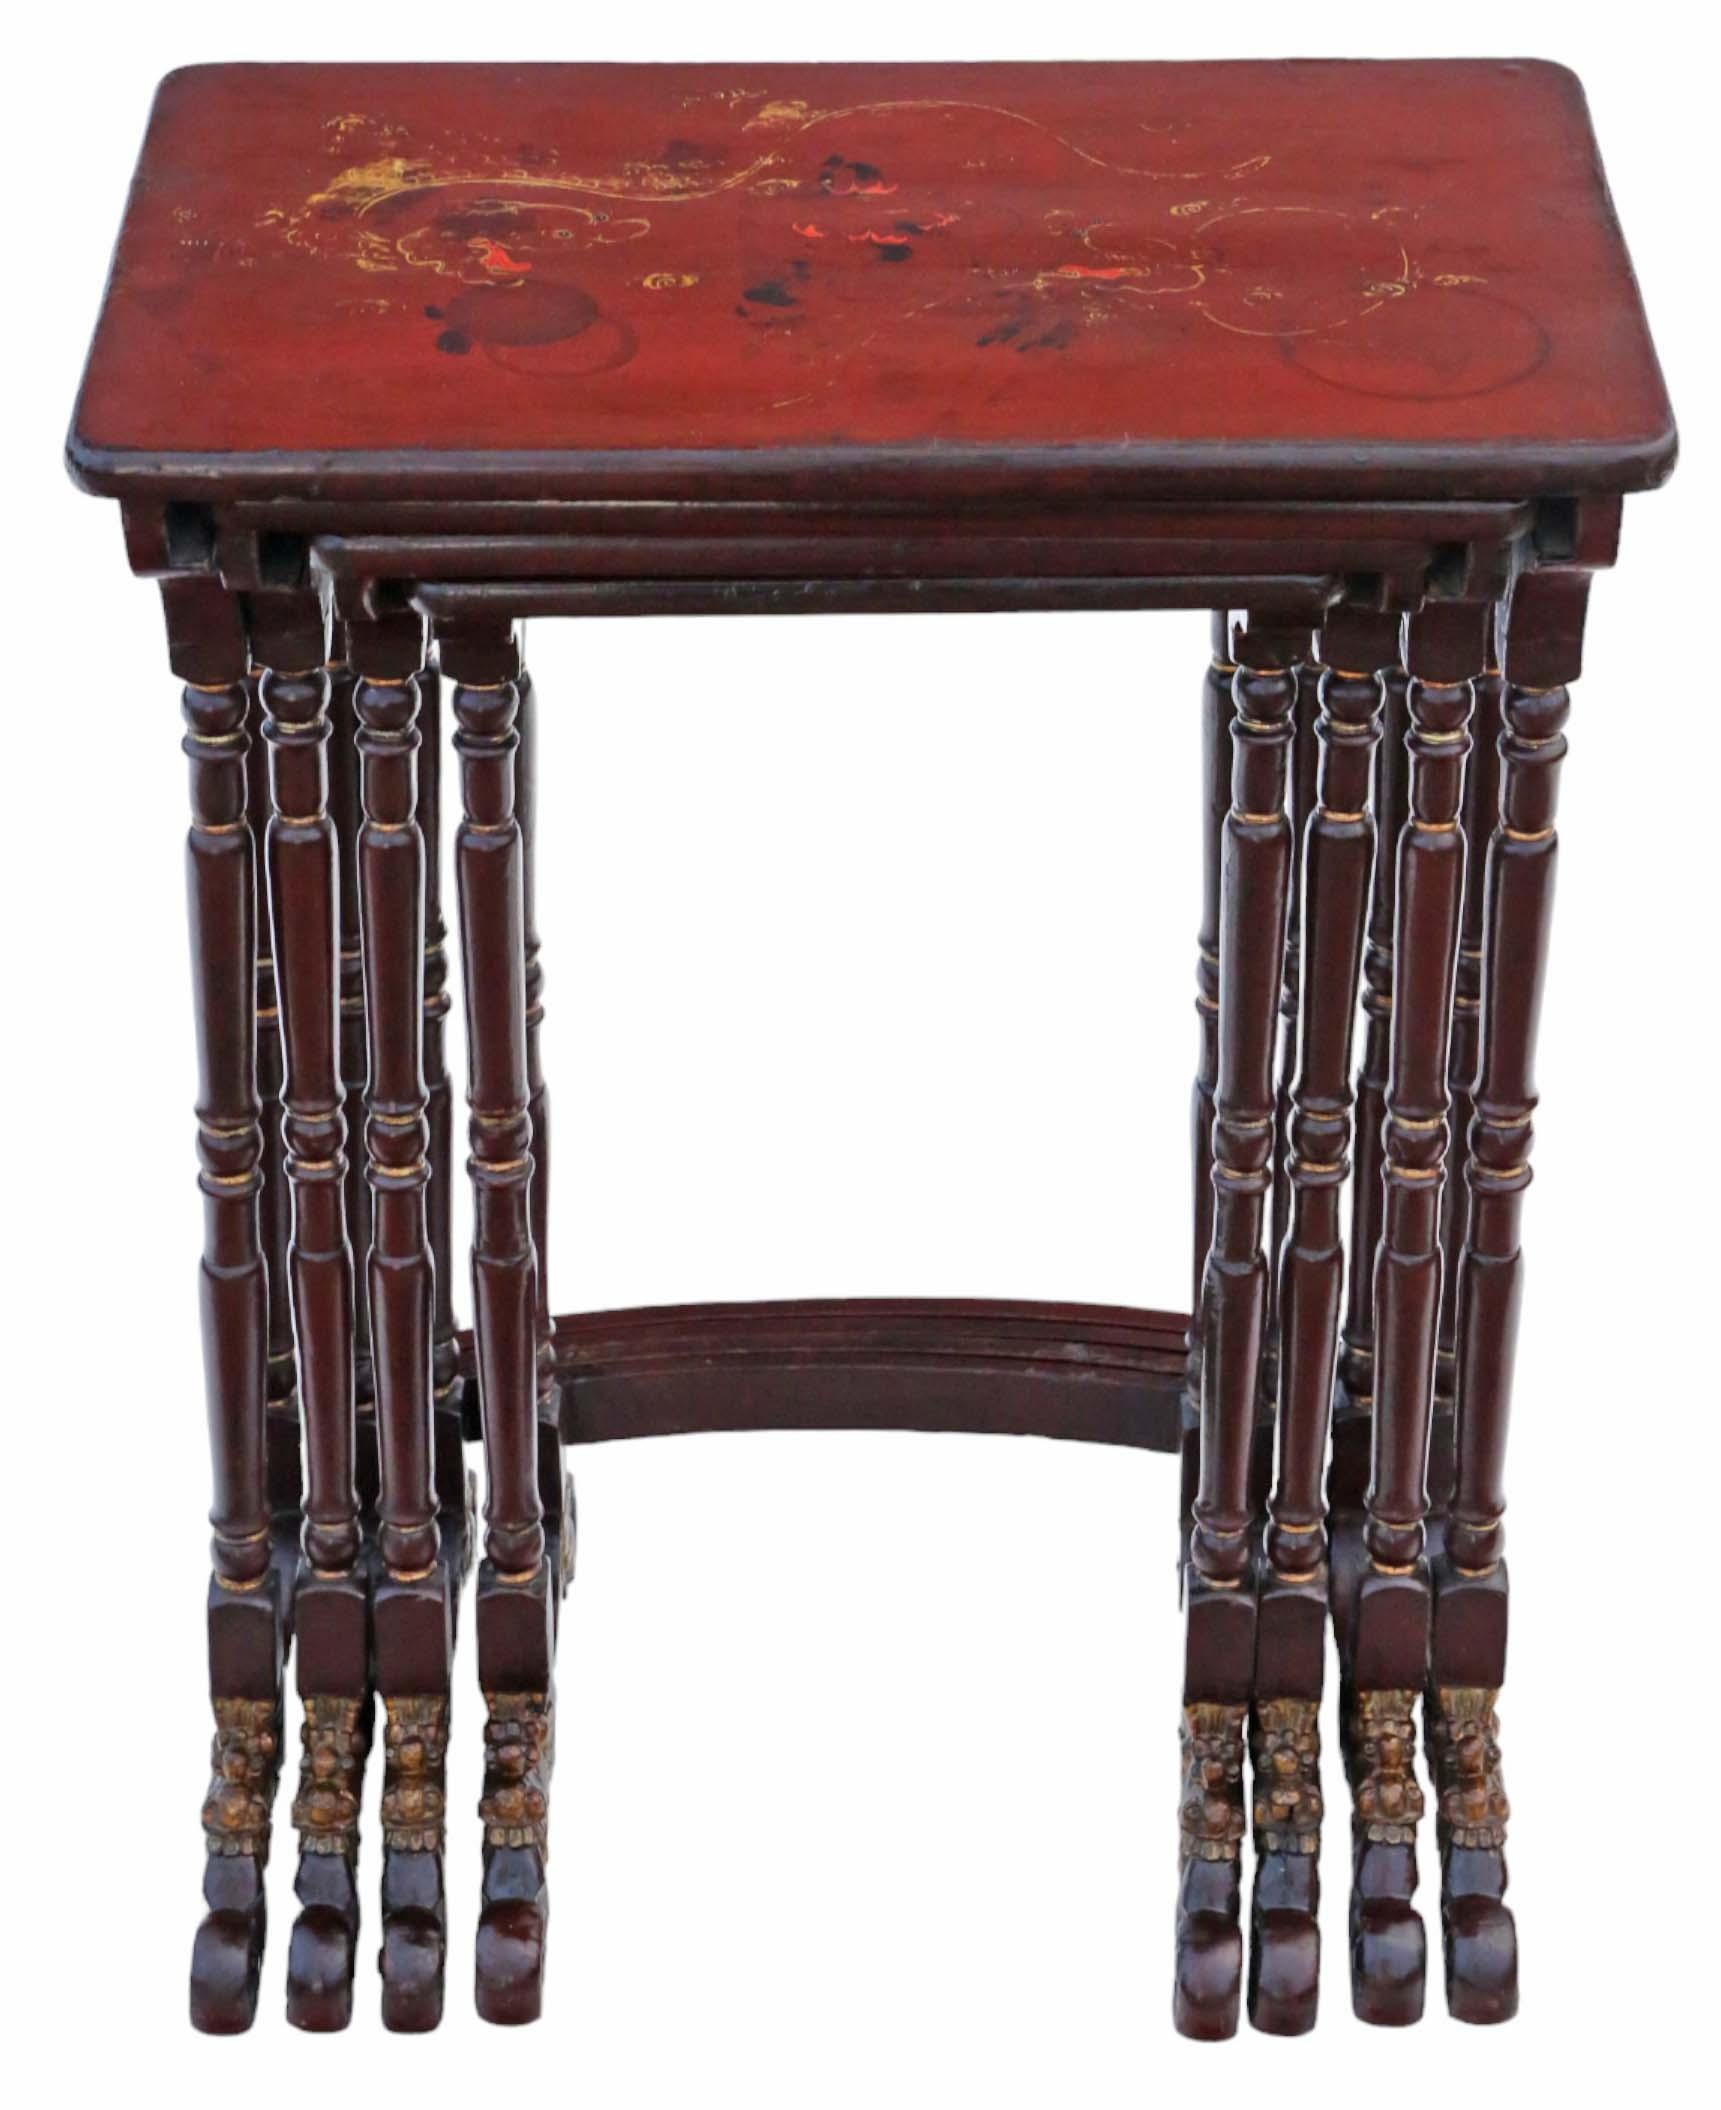 Antique, high-quality Chinoiserie decorated lacquer nest of four tables from the late 19th Century.

This set is very attractive, showcasing lovely proportions and styling—truly a rare find.

The tables are free from loose joints or woodworm. The